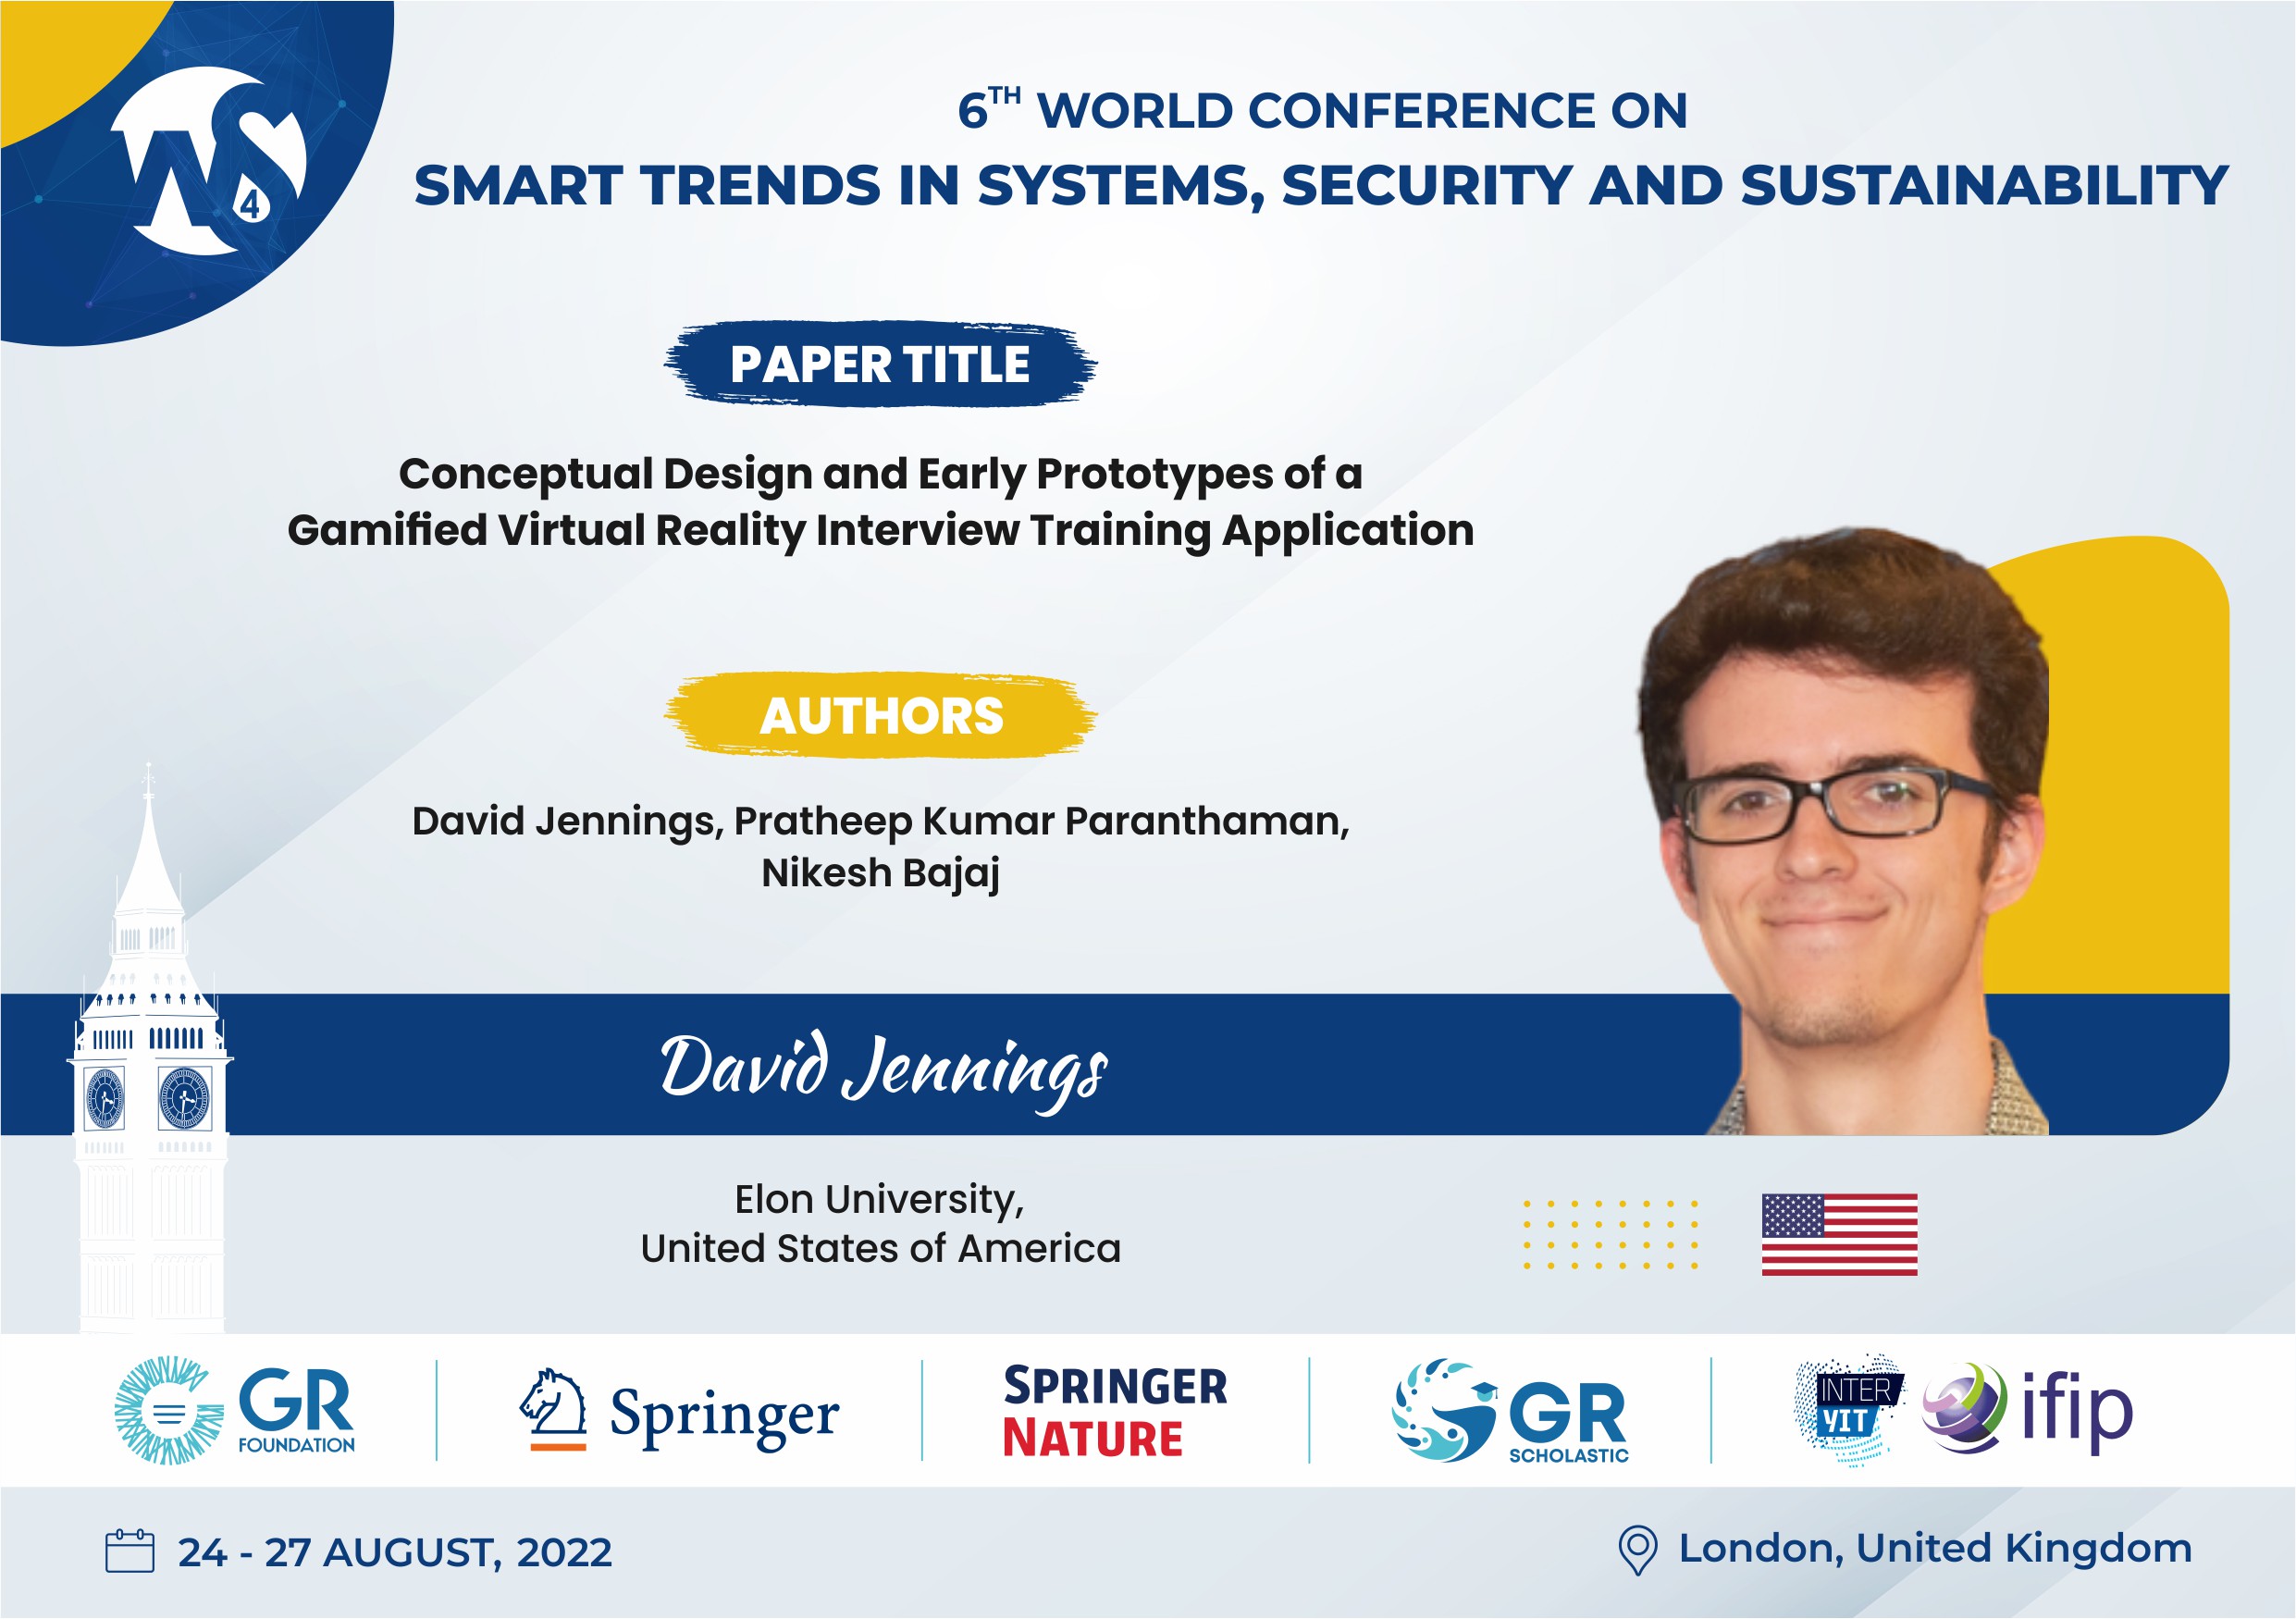 The title slide from David Jennings' presentation at the 6th annual World Conference on Smart Trends in Systems, Security and Sustainability about his paper, 